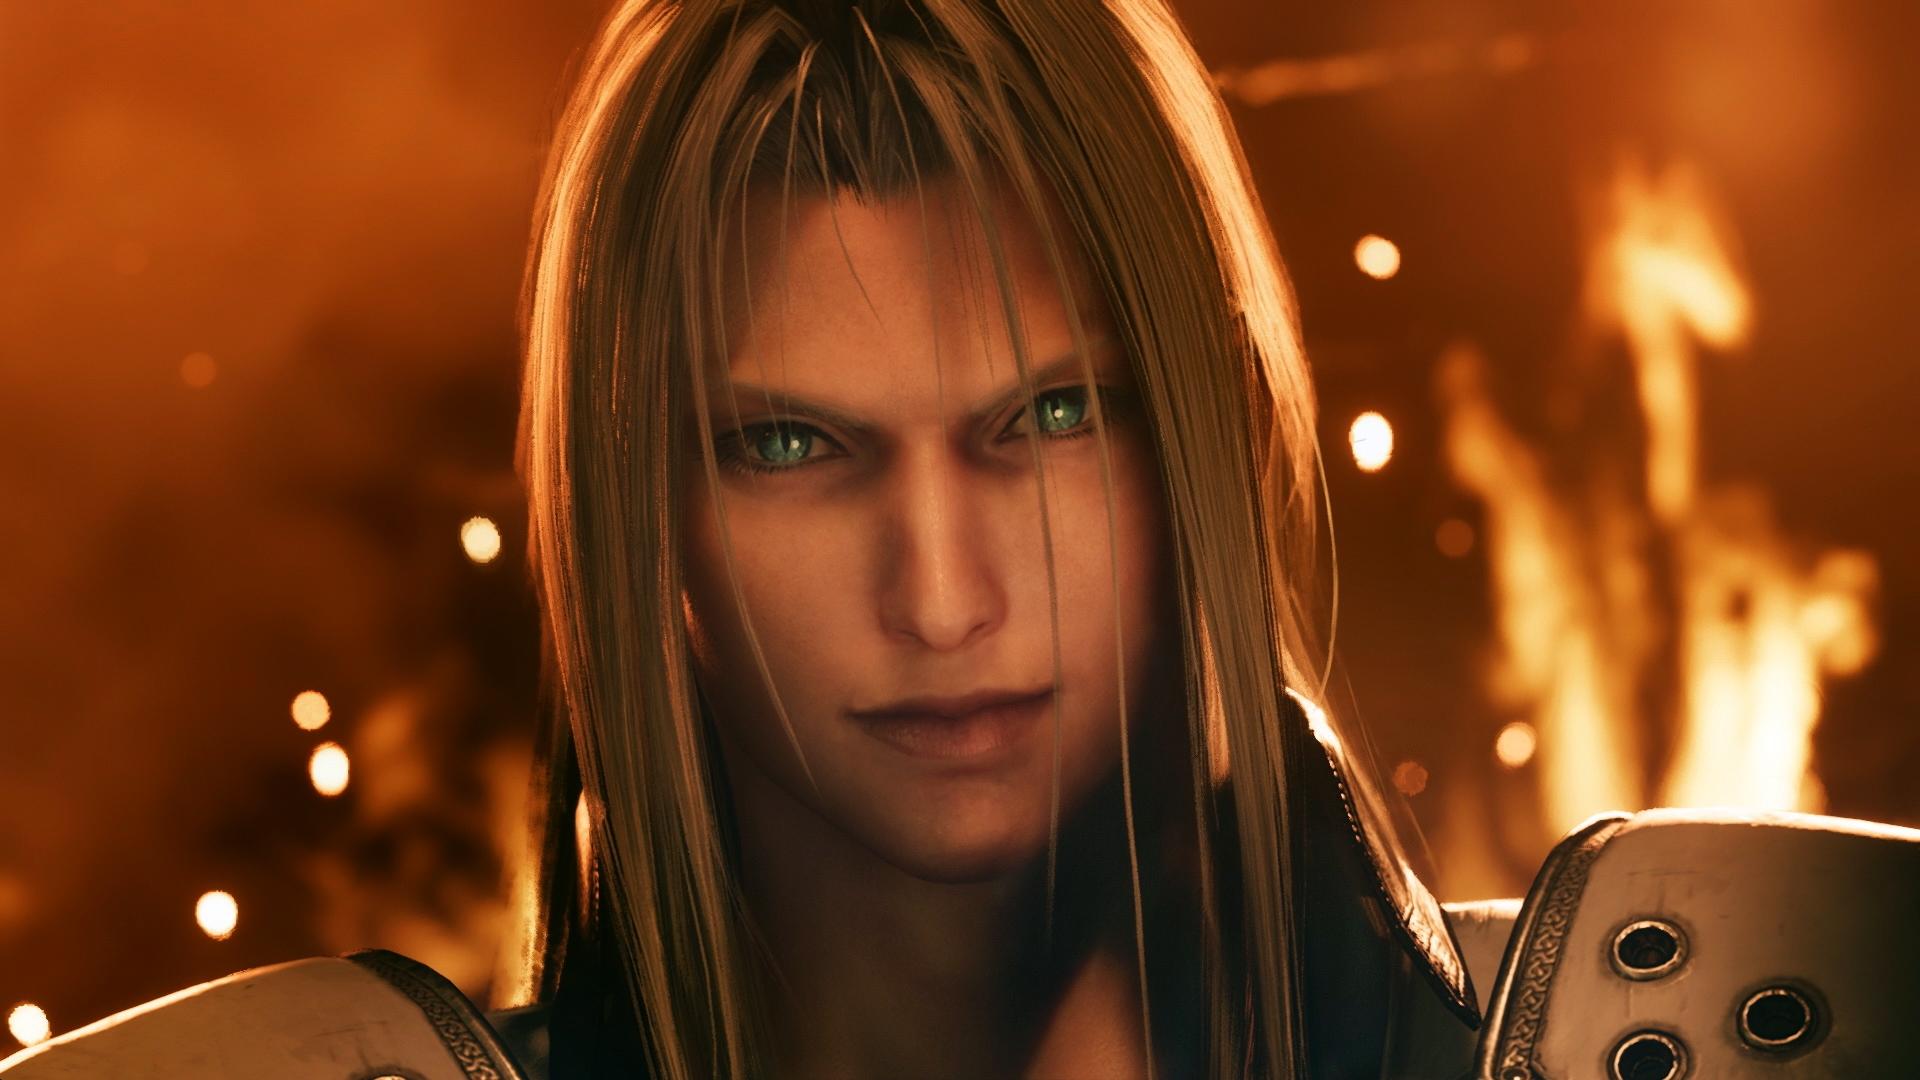 PlayStation Store listing for a Final Fantasy VII Remake demo